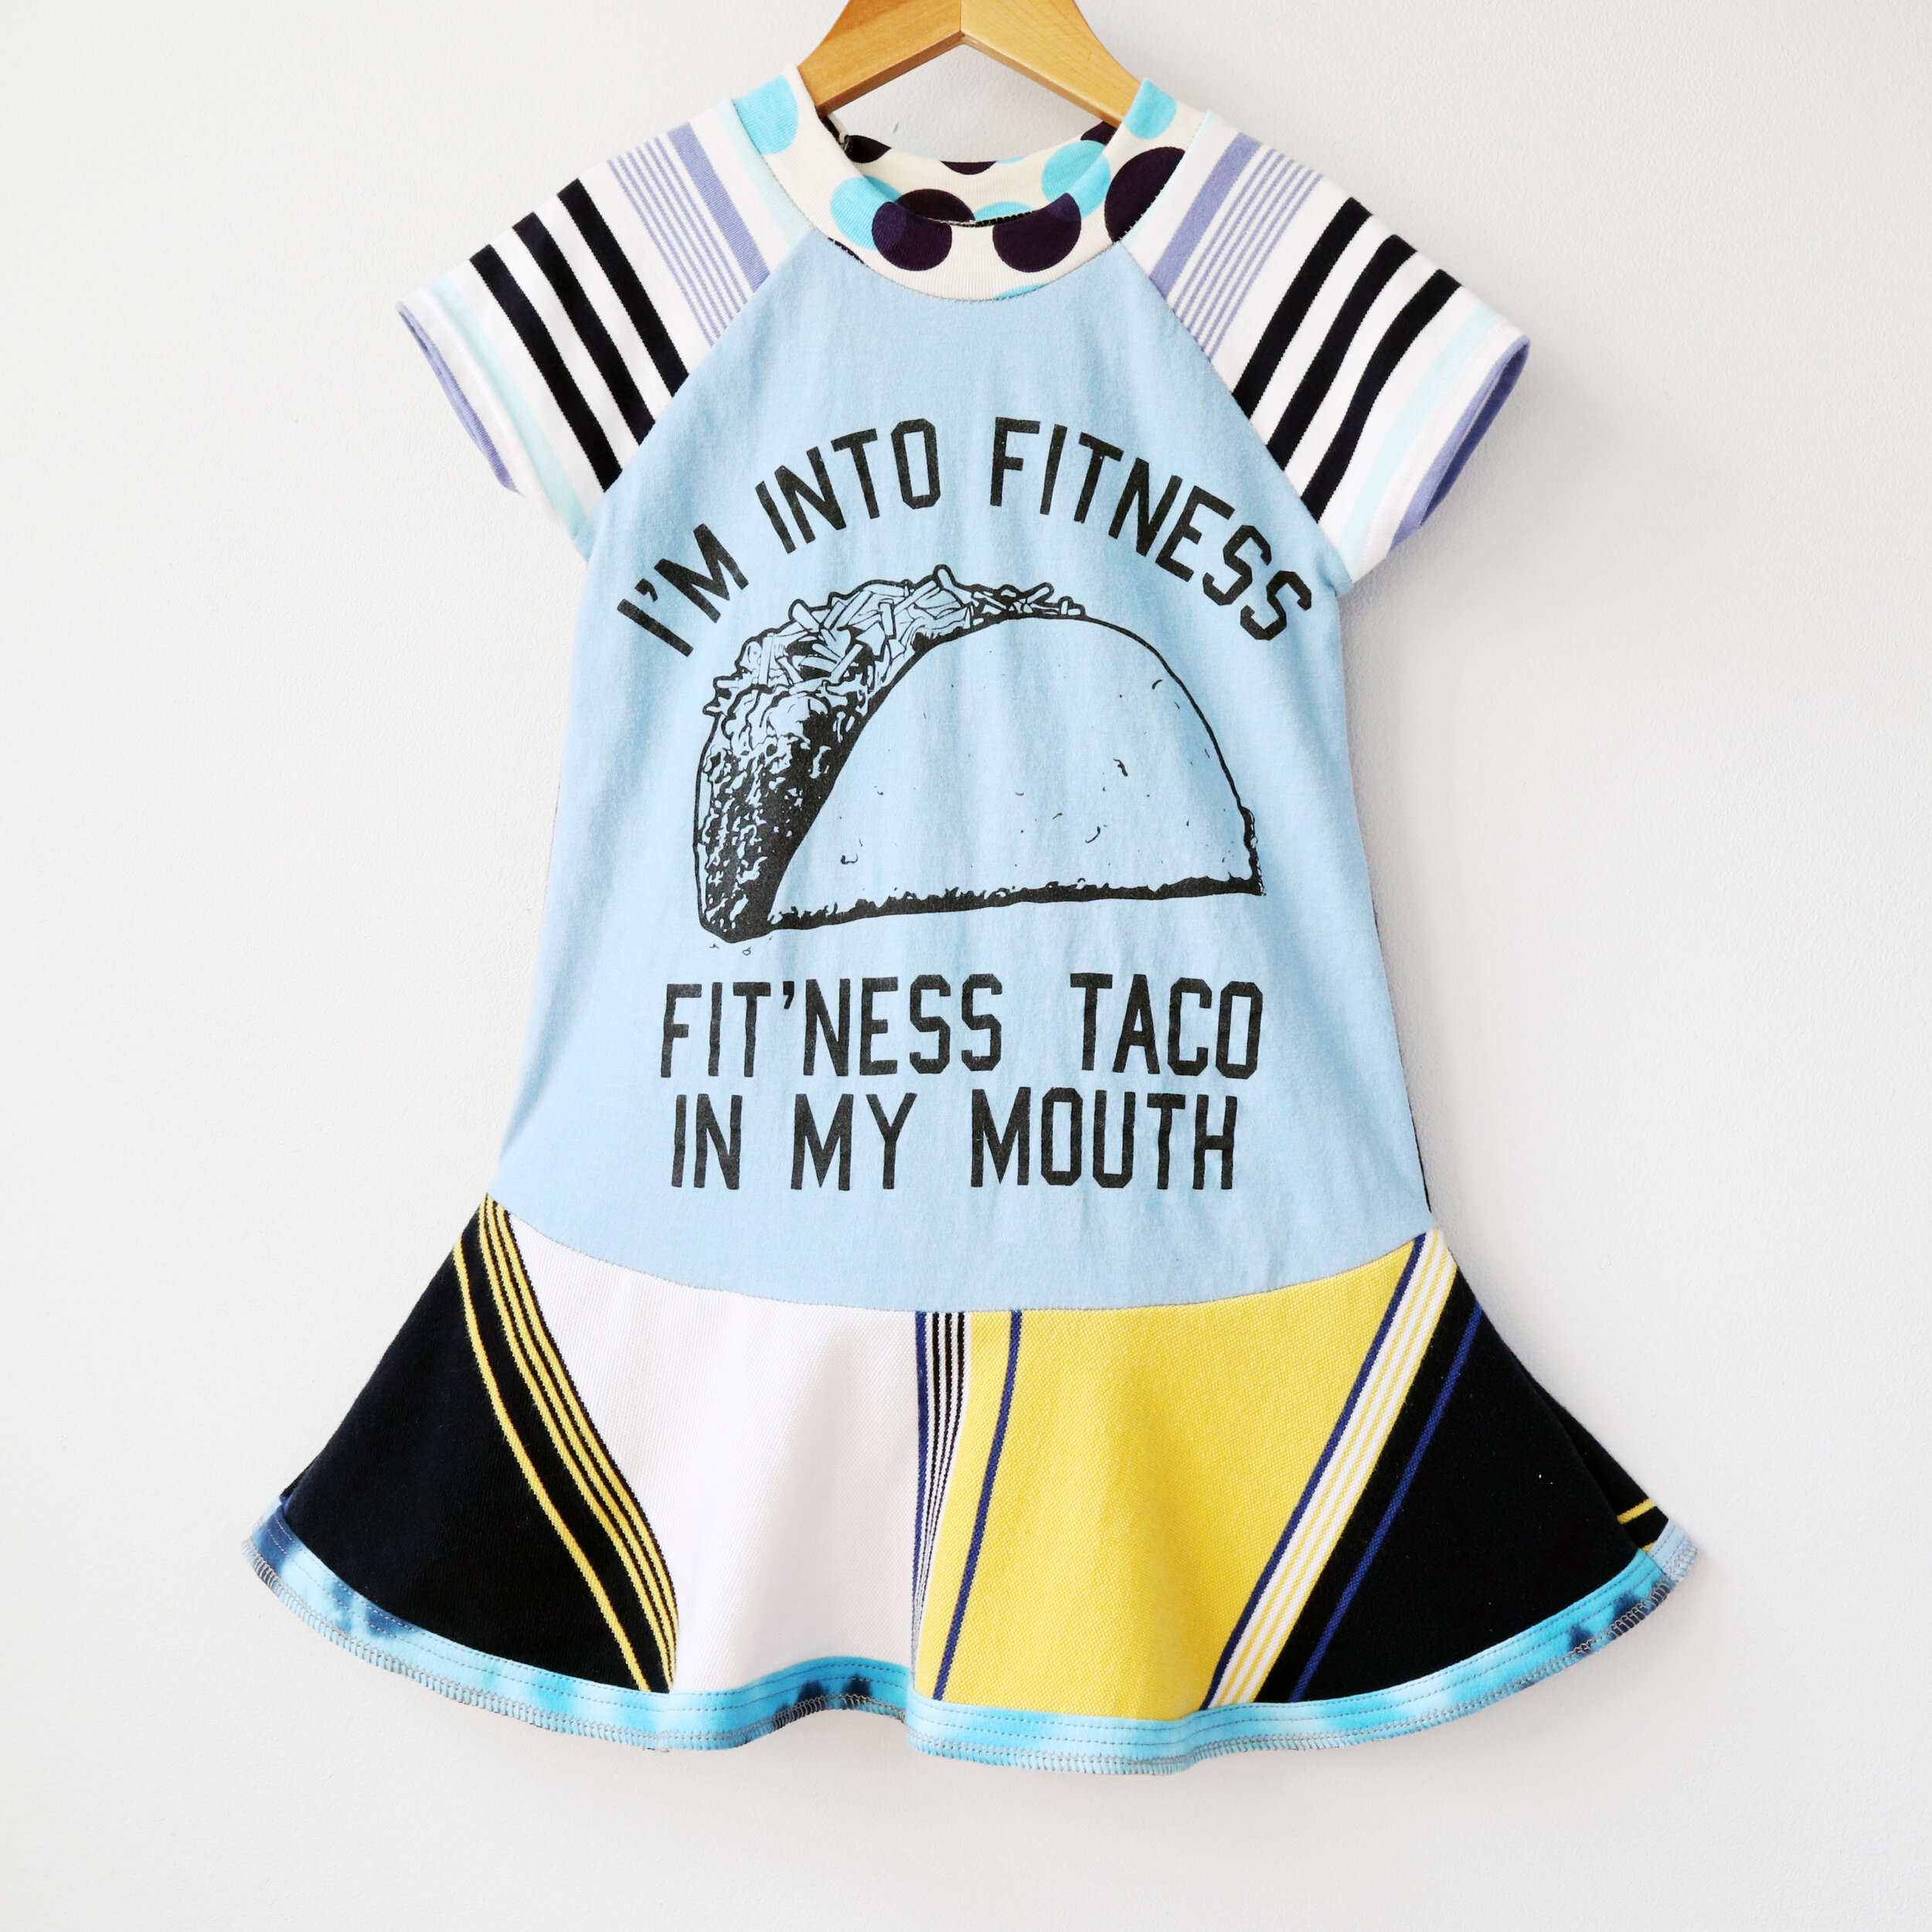 3T taco:bout:fitness:ss.jpg